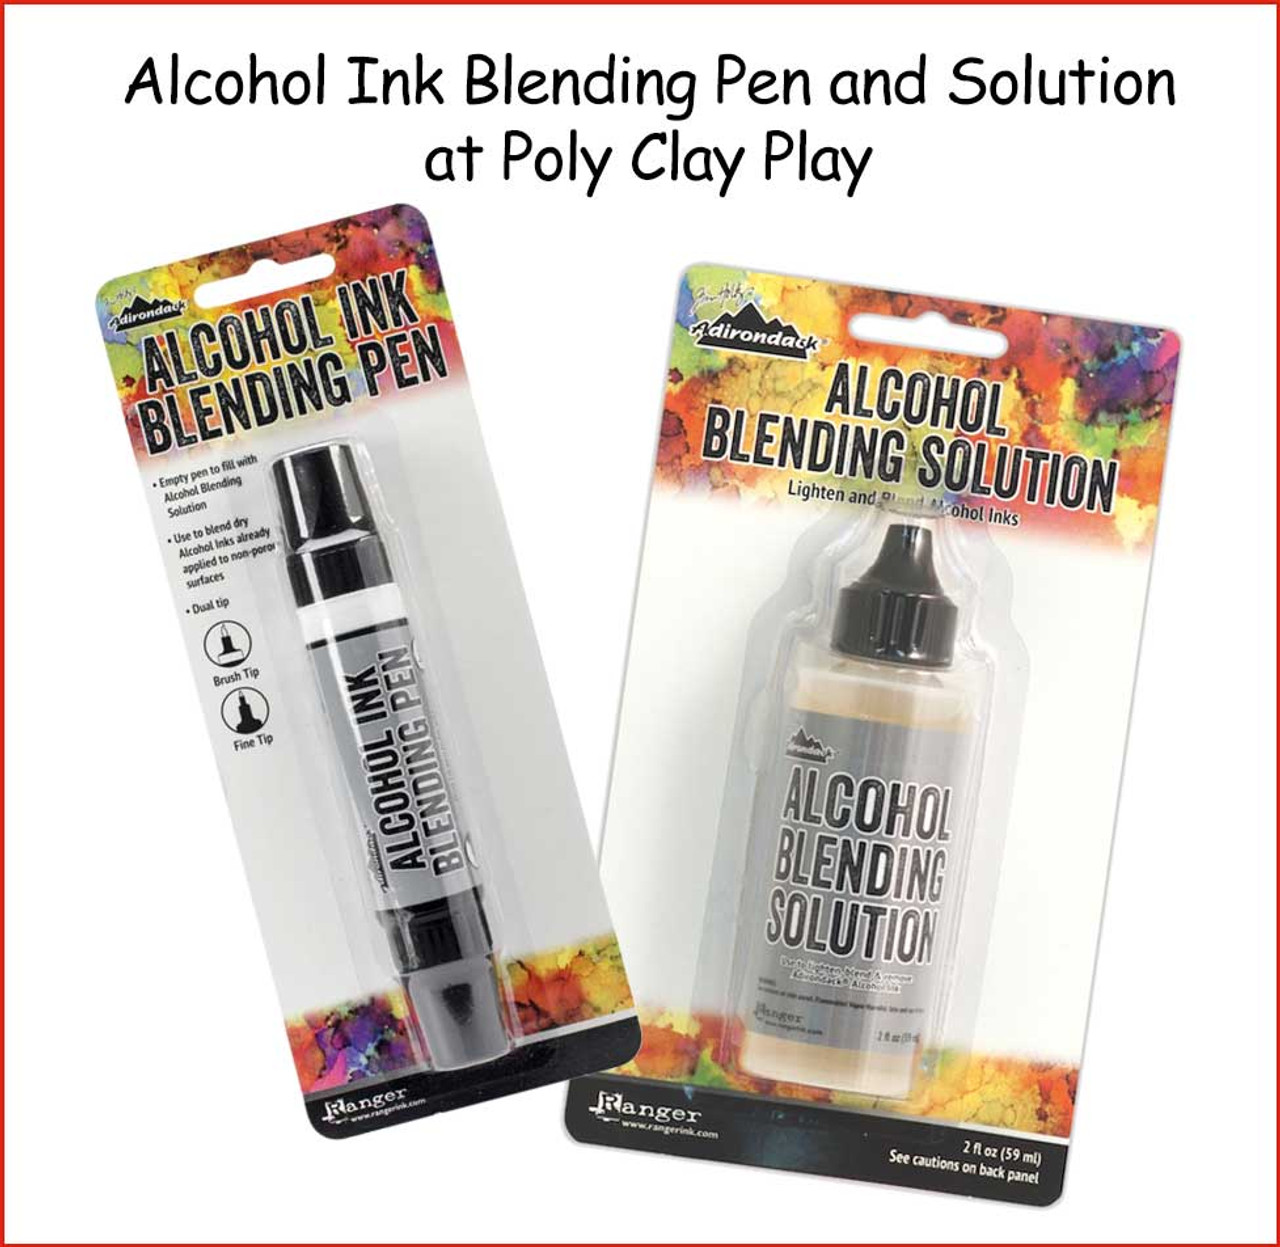 Alcohol Blending Pen or Solution - Poly Clay Play